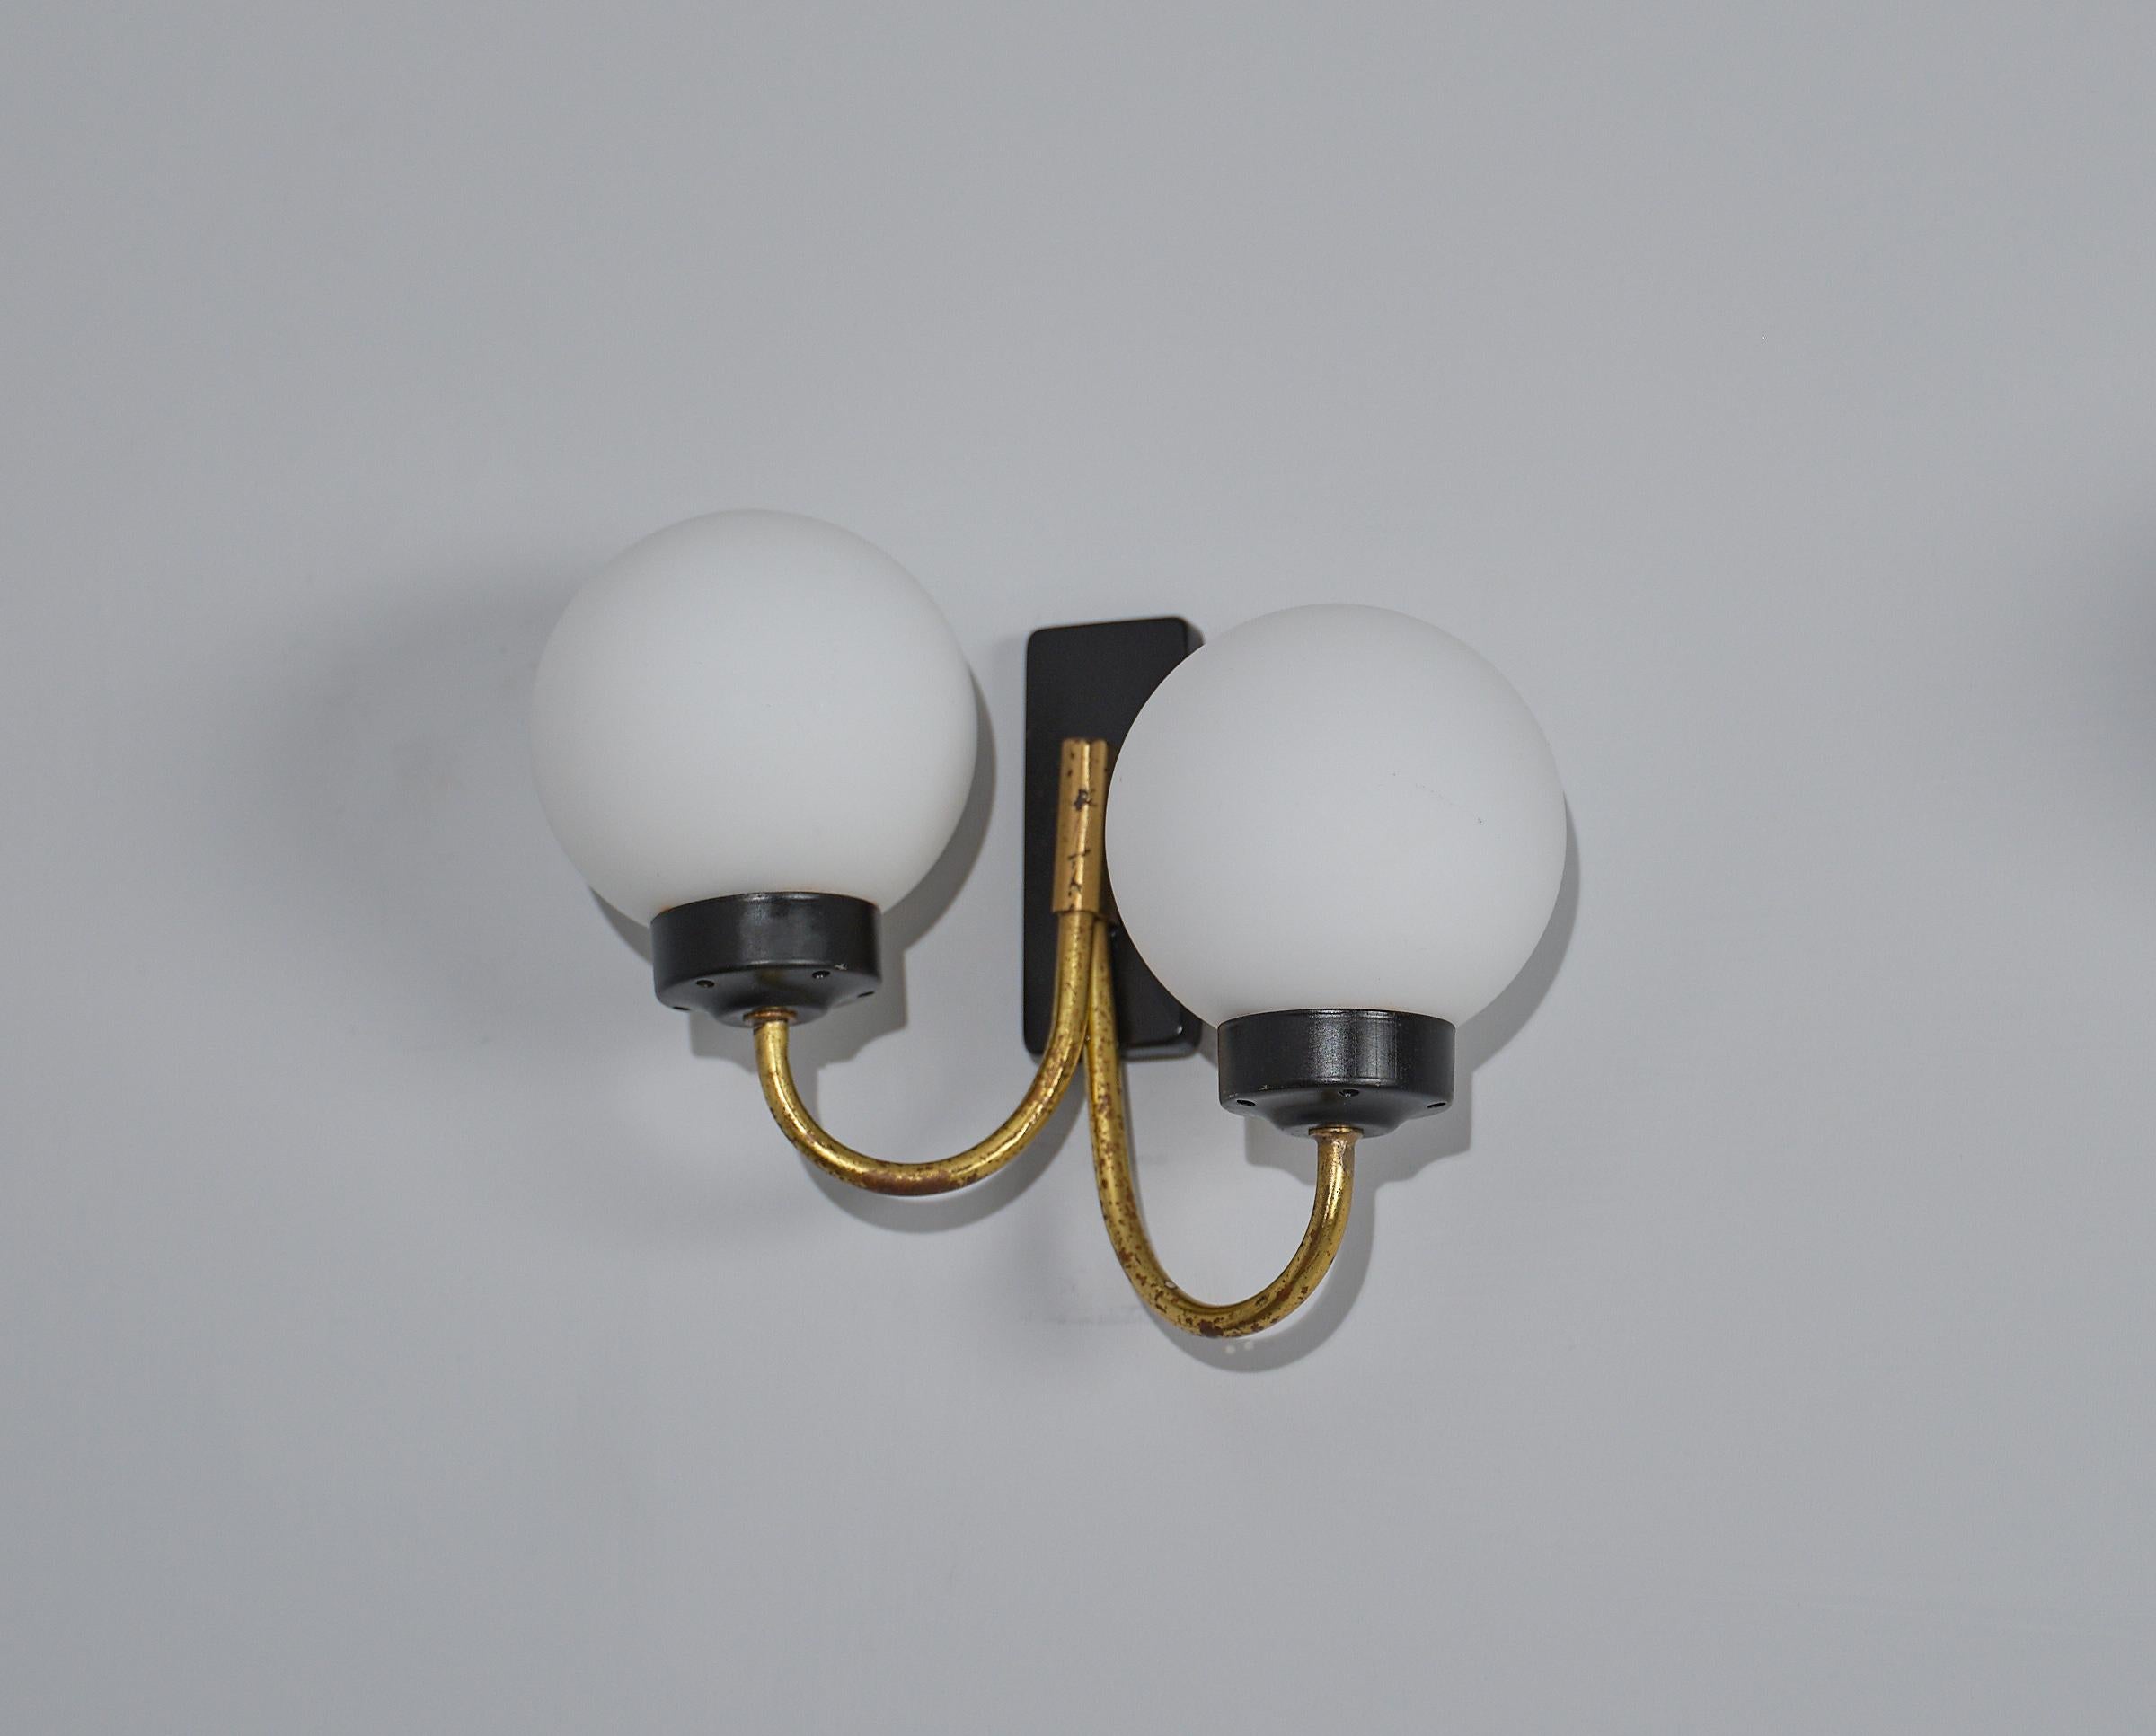 Pair of Italian Design Wall Sconces - 1950s Vintage, Brass and Black Metal For Sale 1